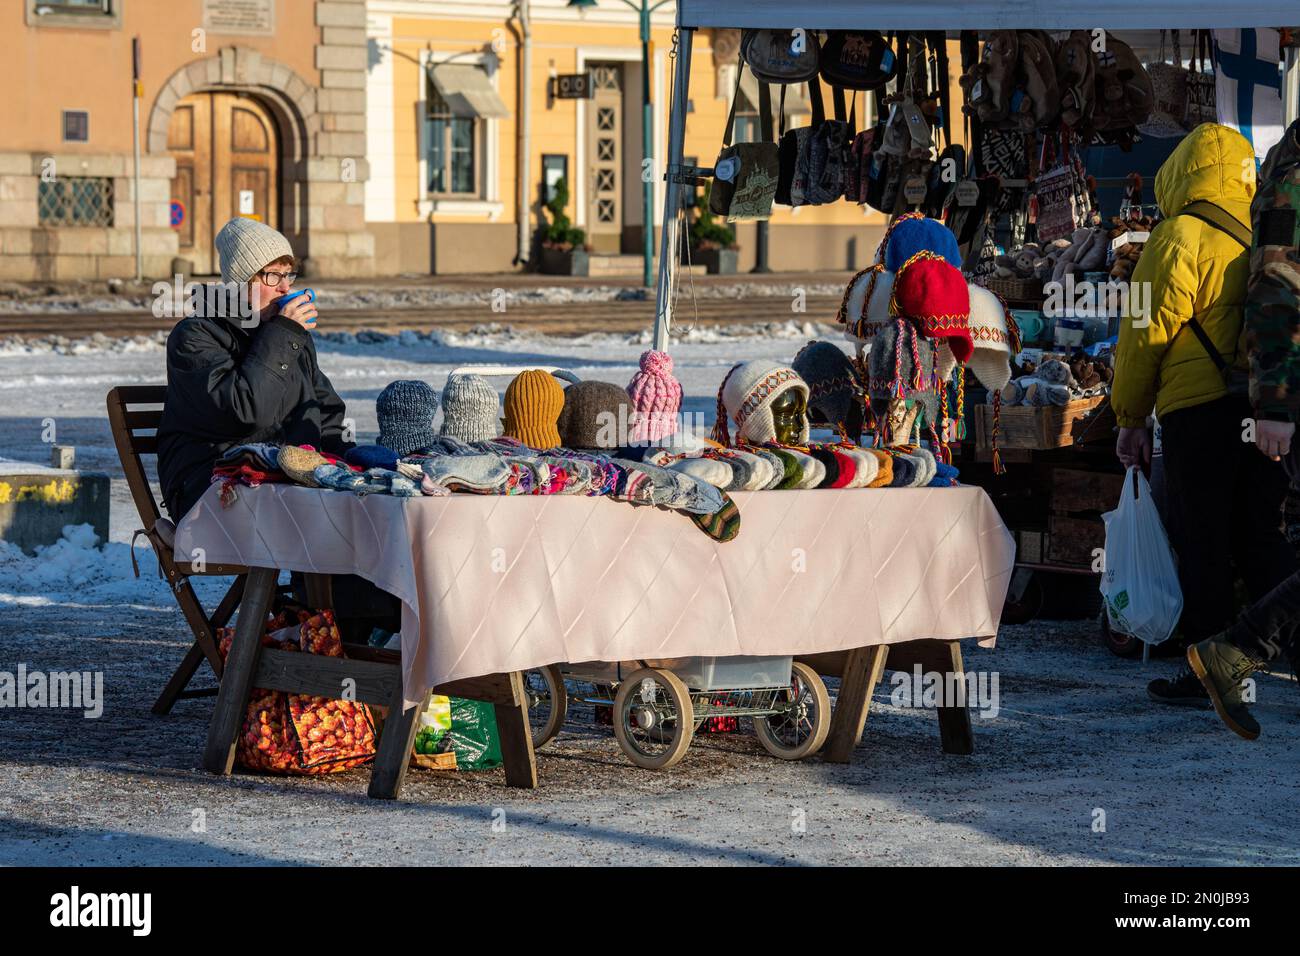 Market square vendor selling woolen socks, beanies and mittens in Helsinki, Finland Stock Photo